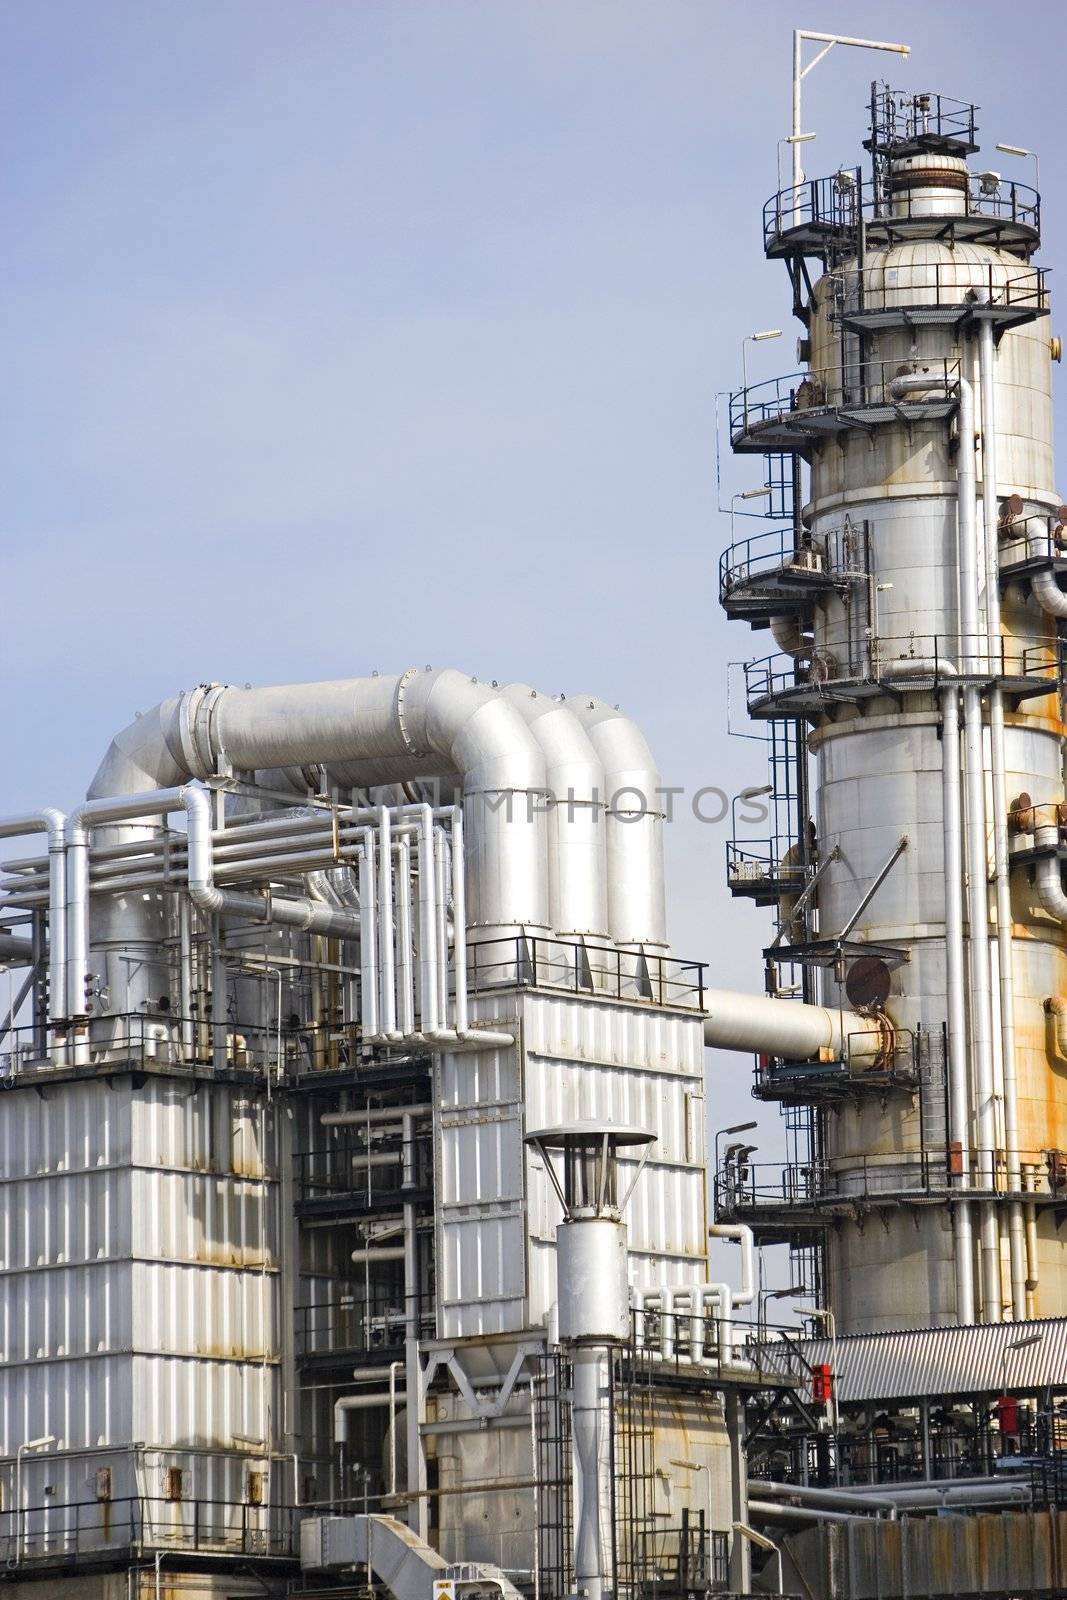 Image of oil refinery equipment in Malaysia.